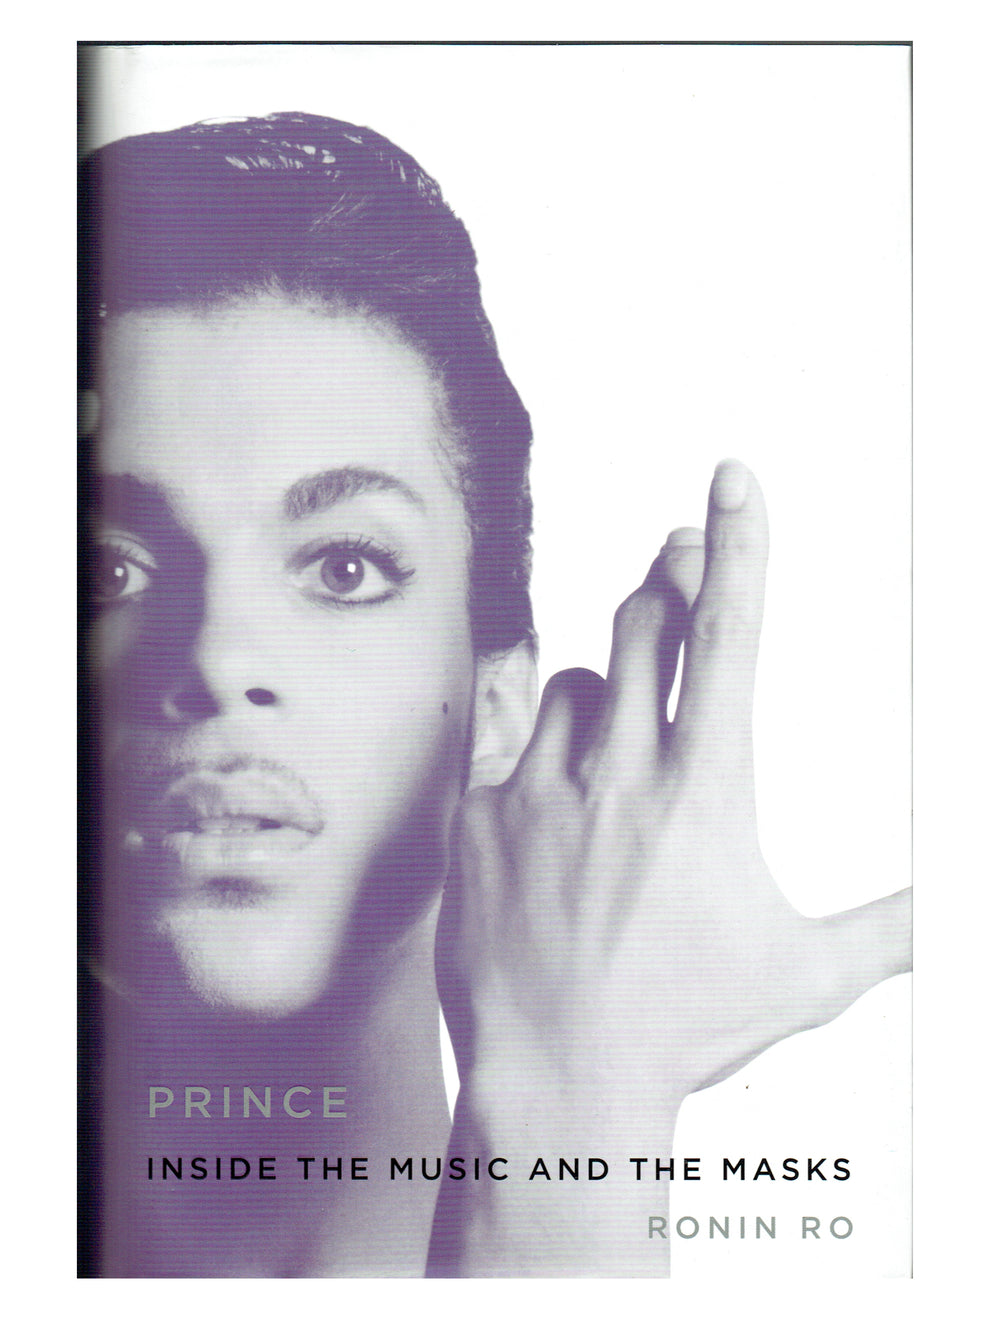 Prince Inside The Music & The Masks Hardback Book 370 Pages Rare